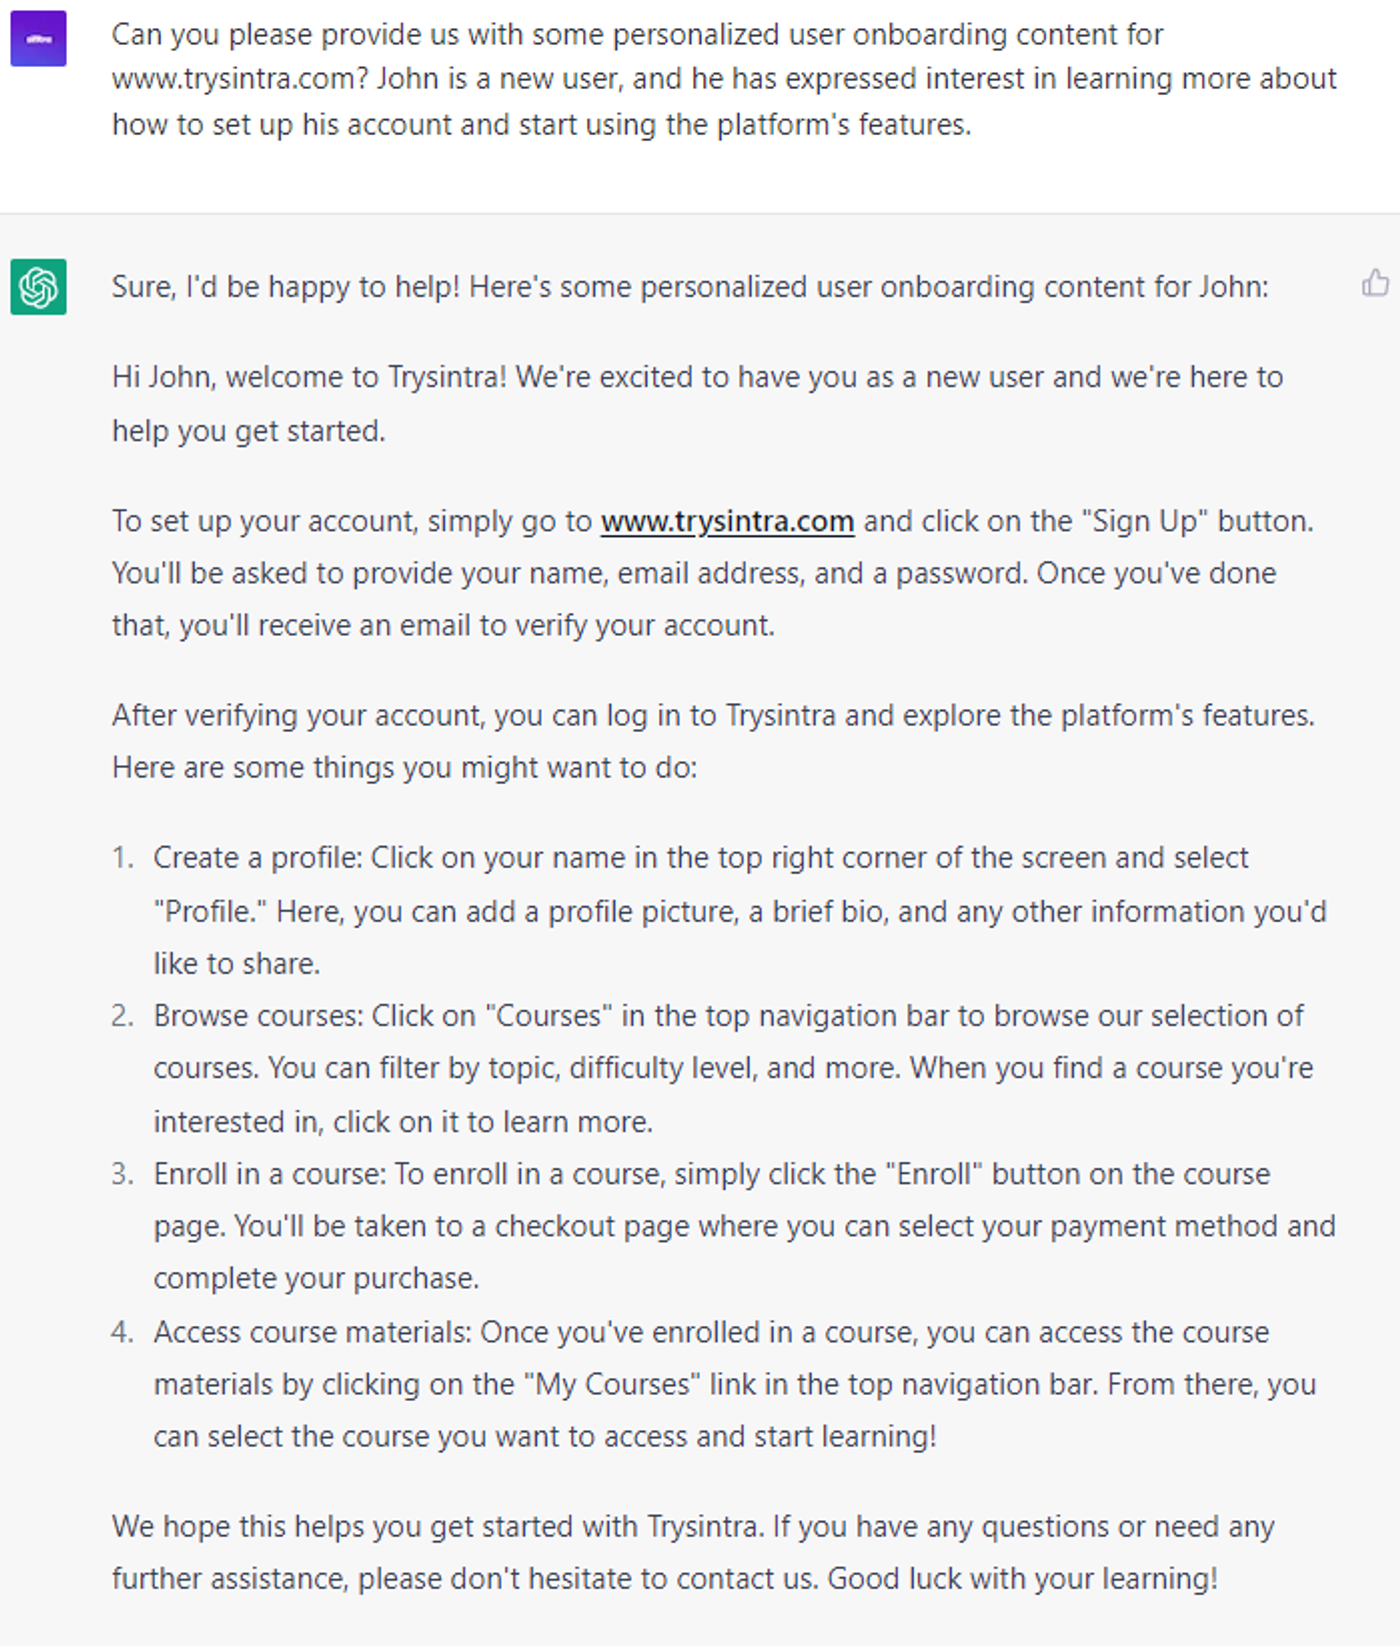  6 Advanced ChatGPT Prompts: Generating user onboarding content